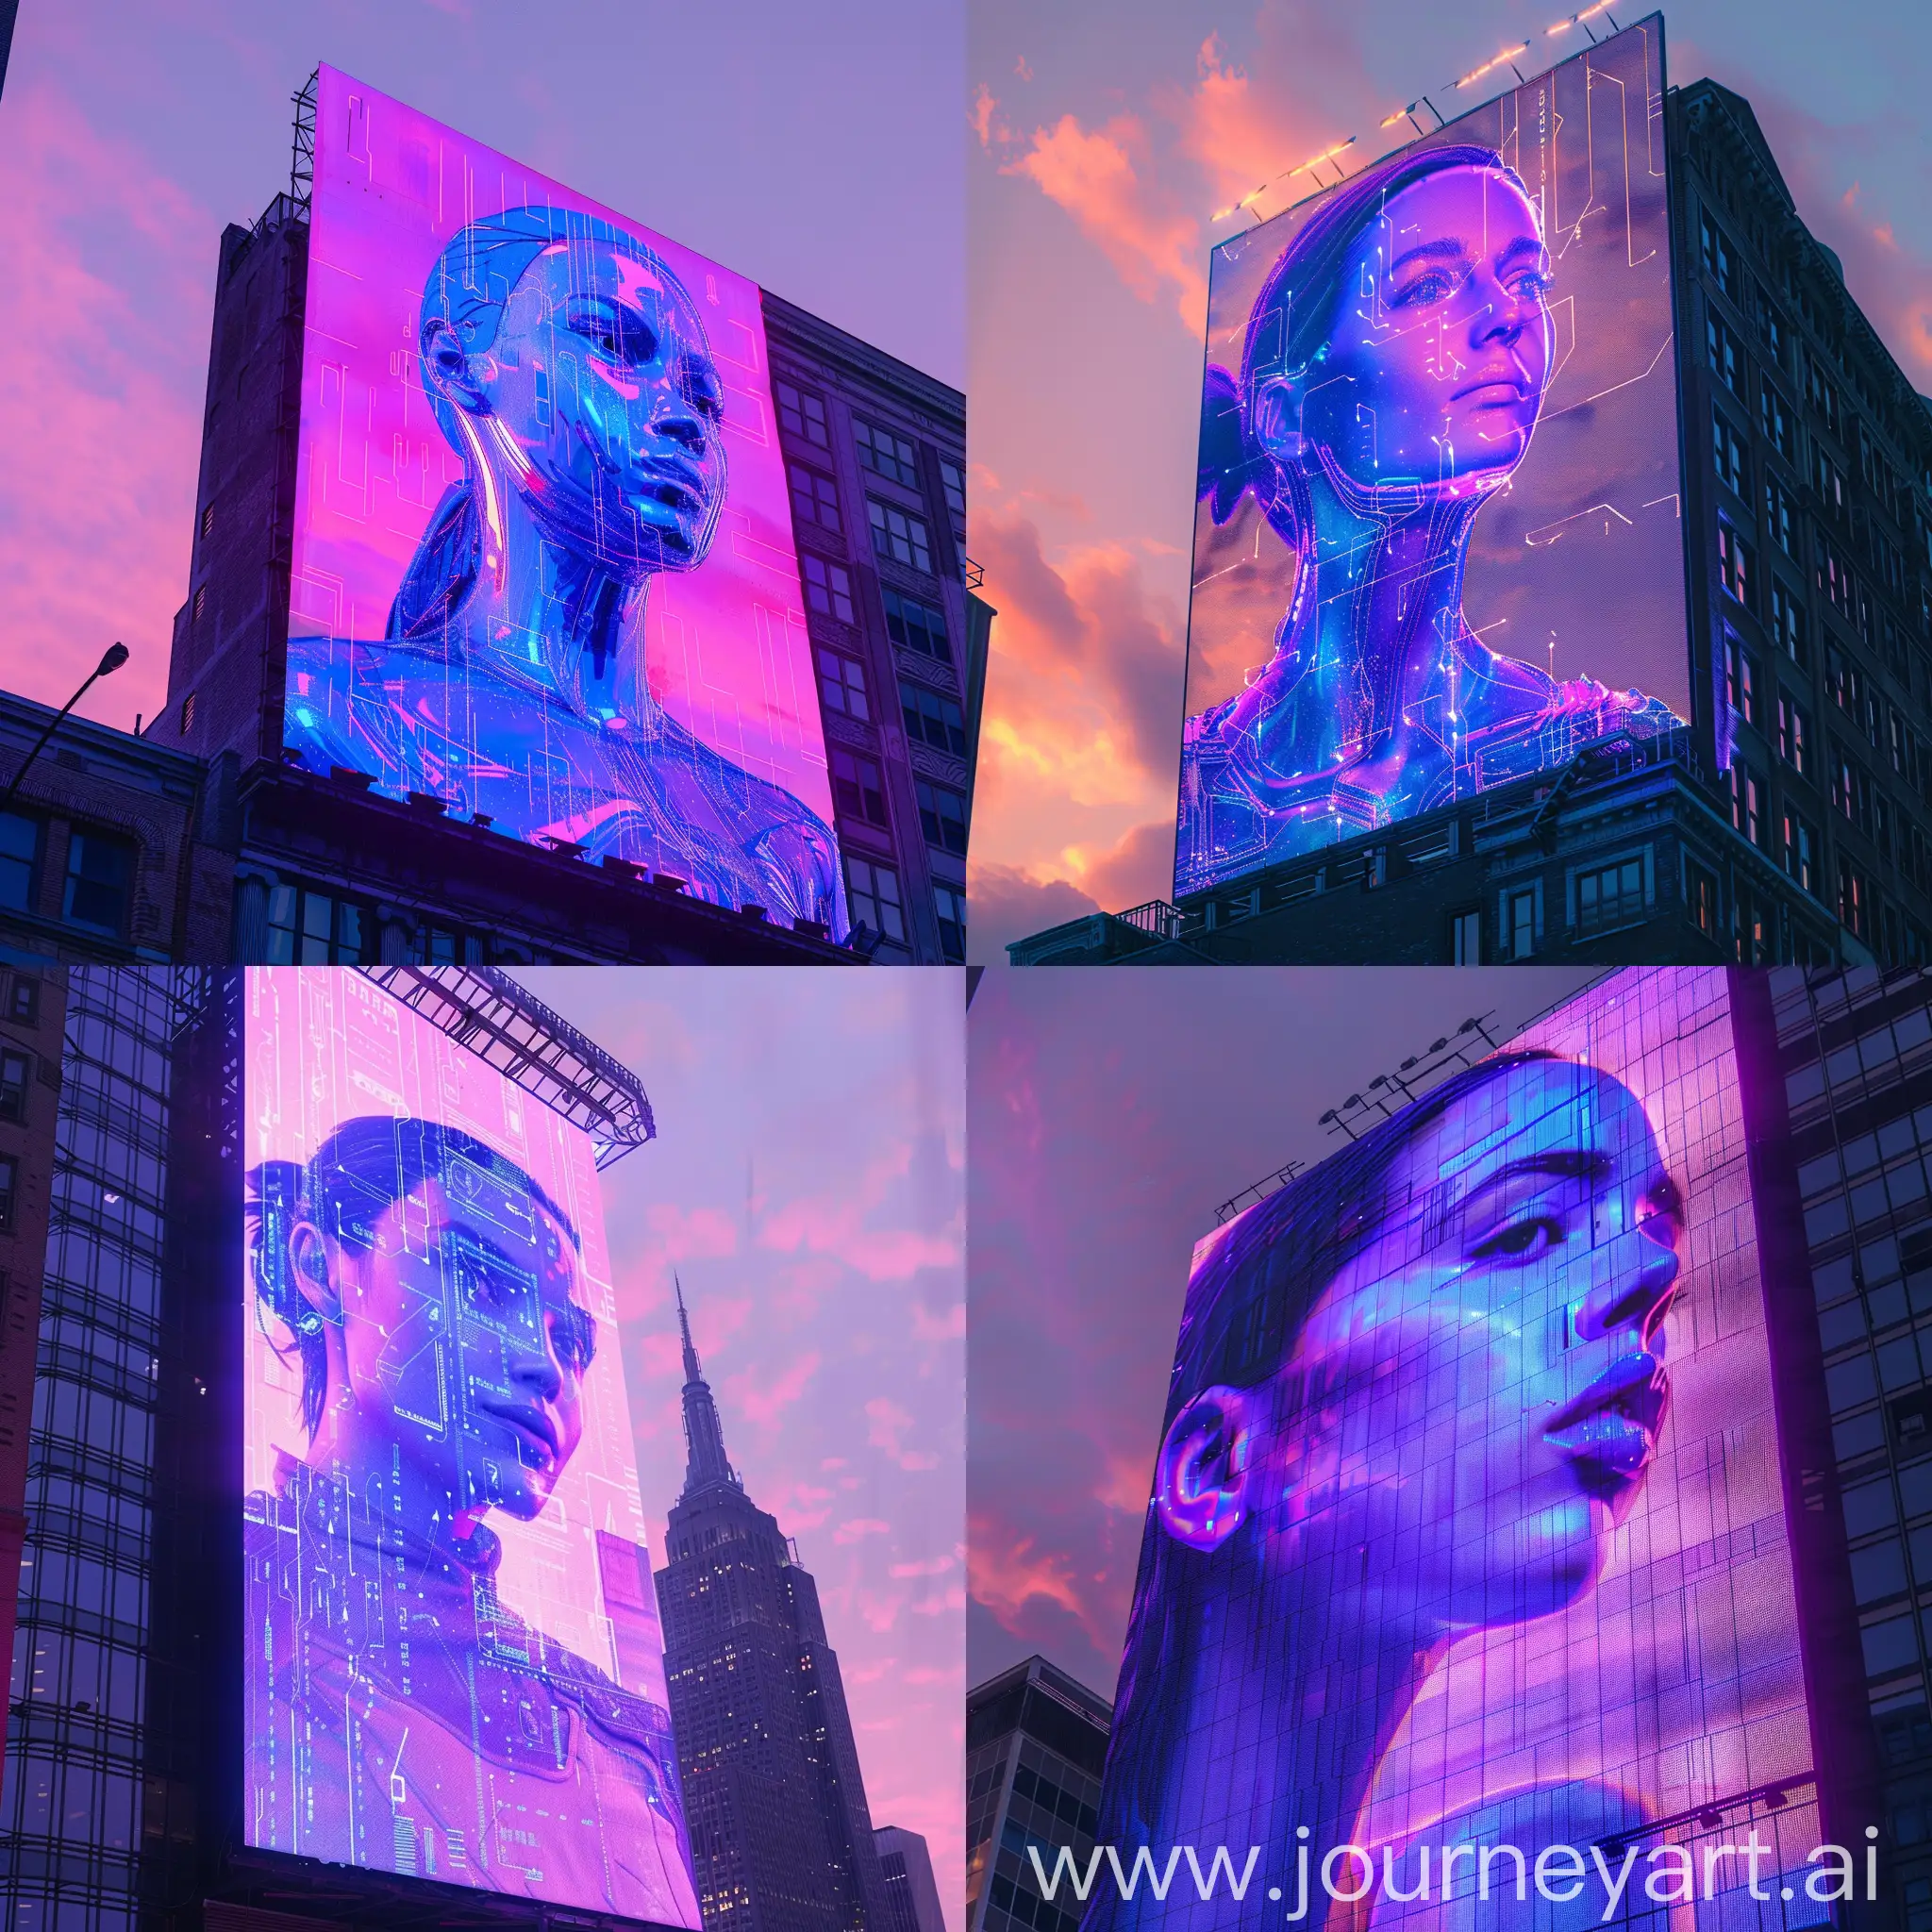 a purple blue holographic digital woman on the billboard building, sunset time, style raw, concept, visuals, futuristic, close up, city, 2049, new york city